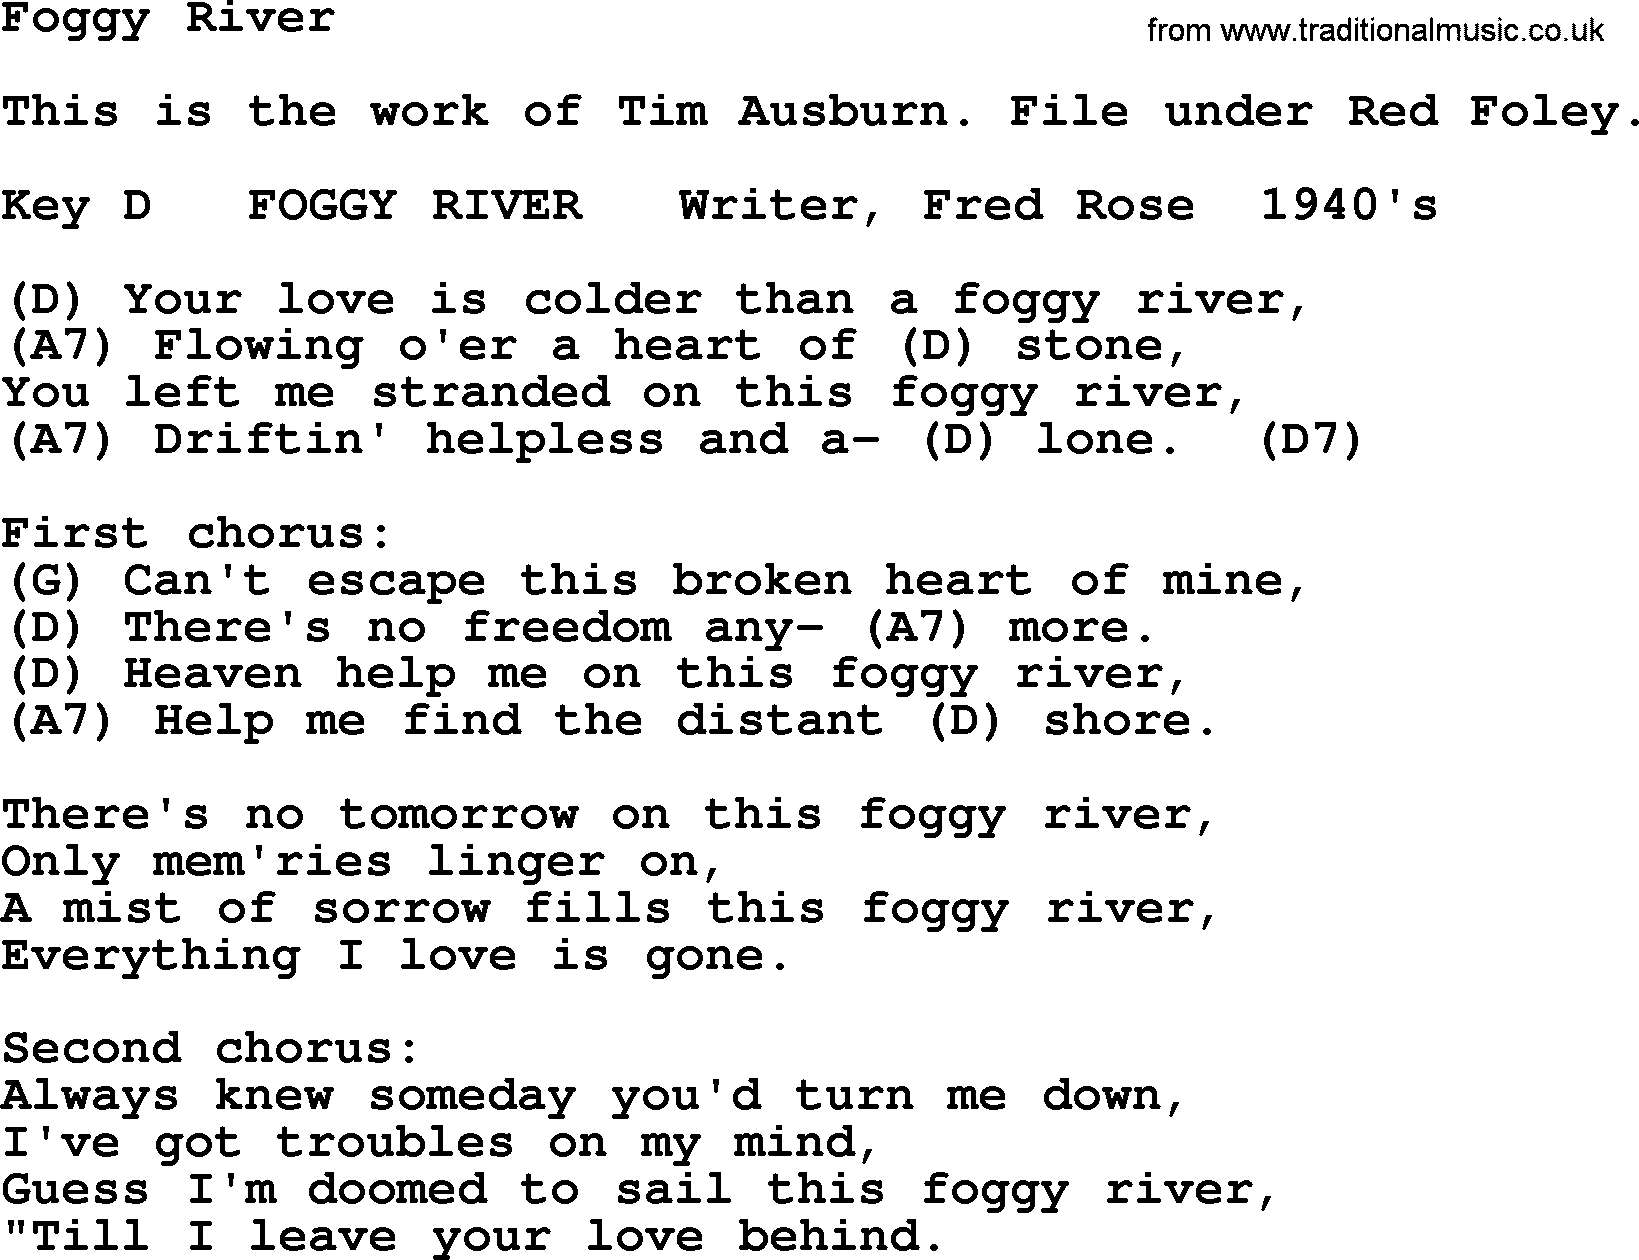 Bluegrass song: Foggy River, lyrics and chords